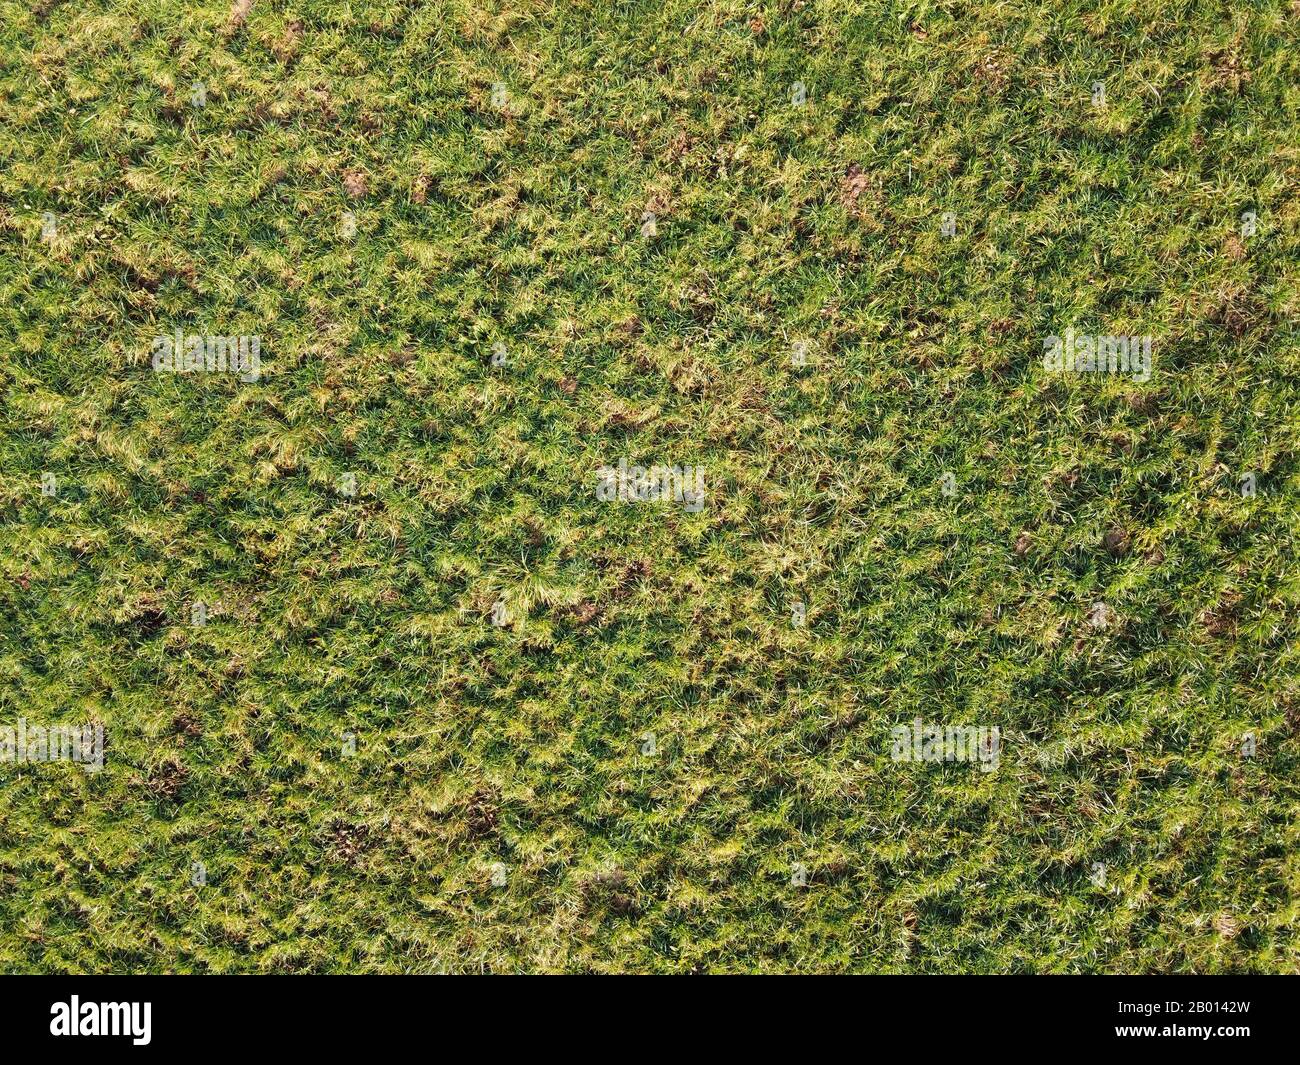 Rugged texture of grass lawn in full frame background concept, shot from above. Top view of green lawn with yellow grass stains Stock Photo